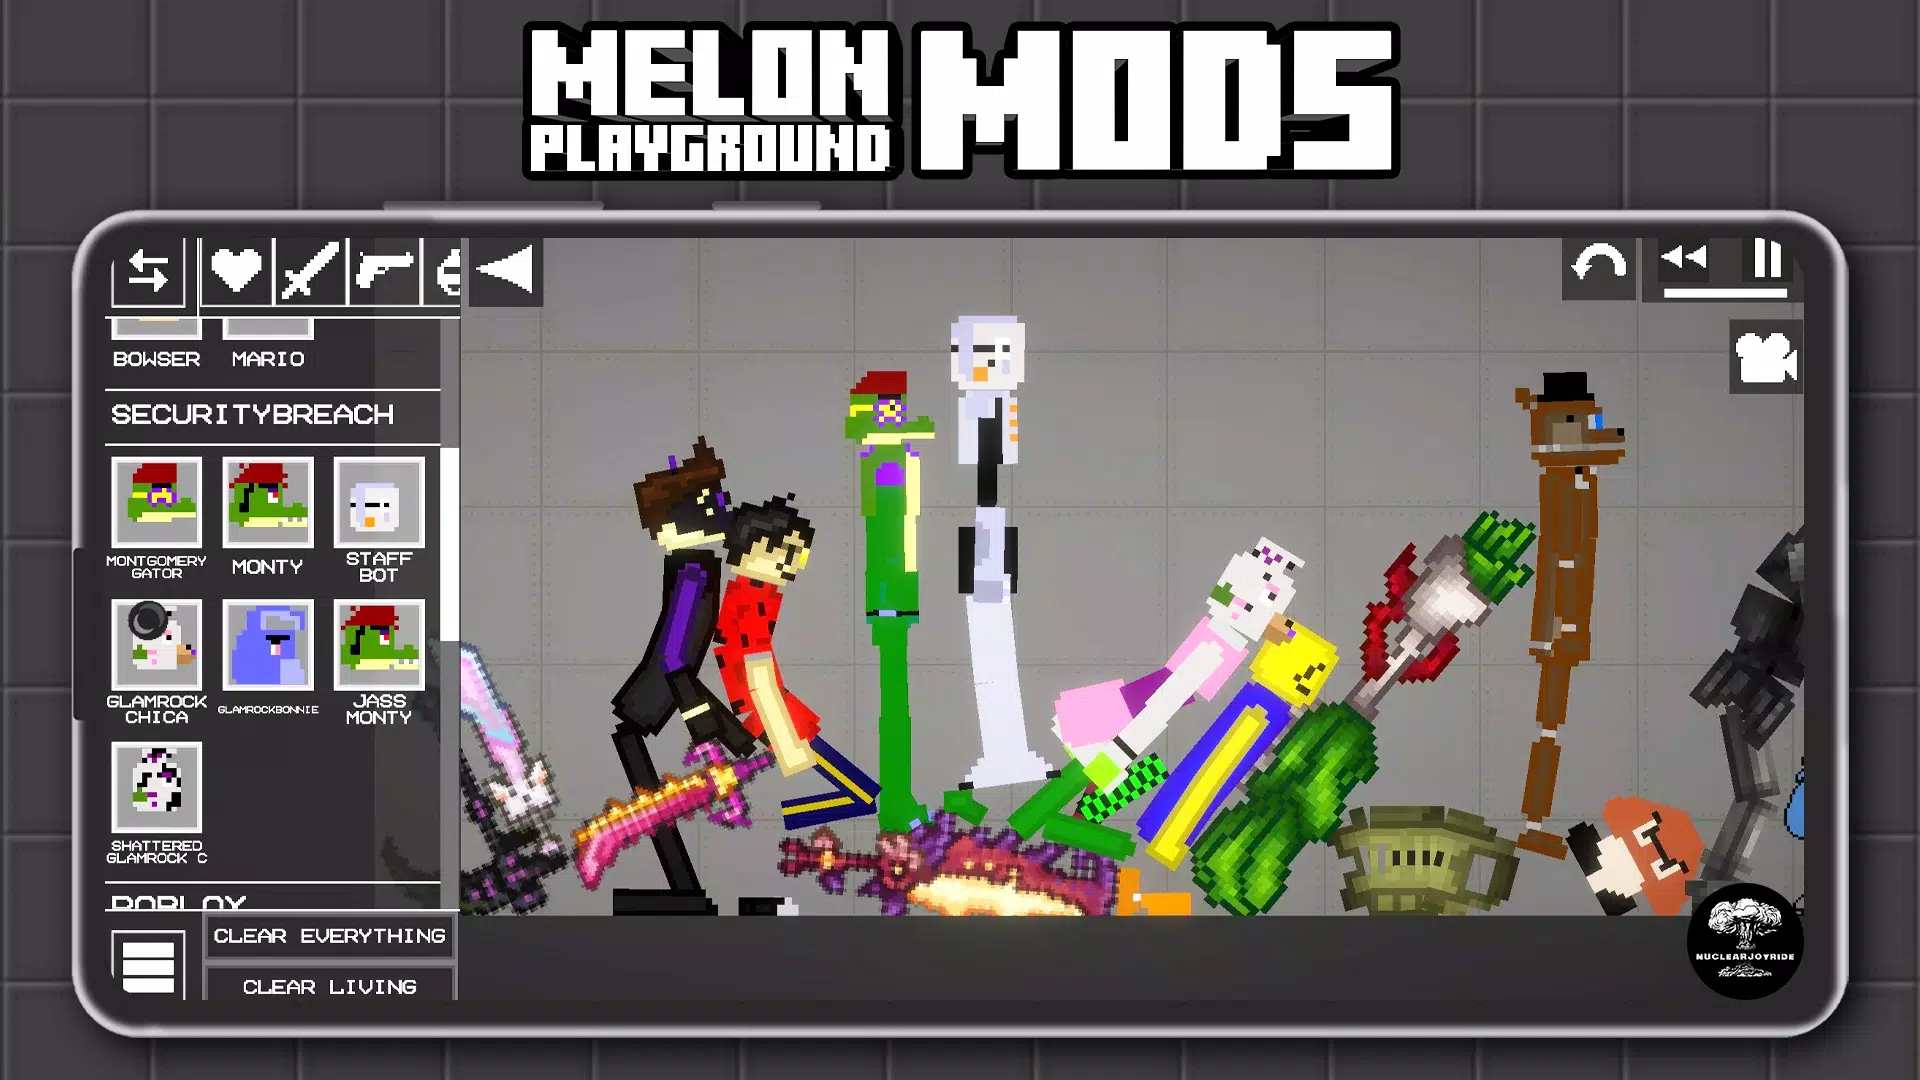 Melon Playground MOD APK 13.4 (Unlocked Everything) Download For Android 